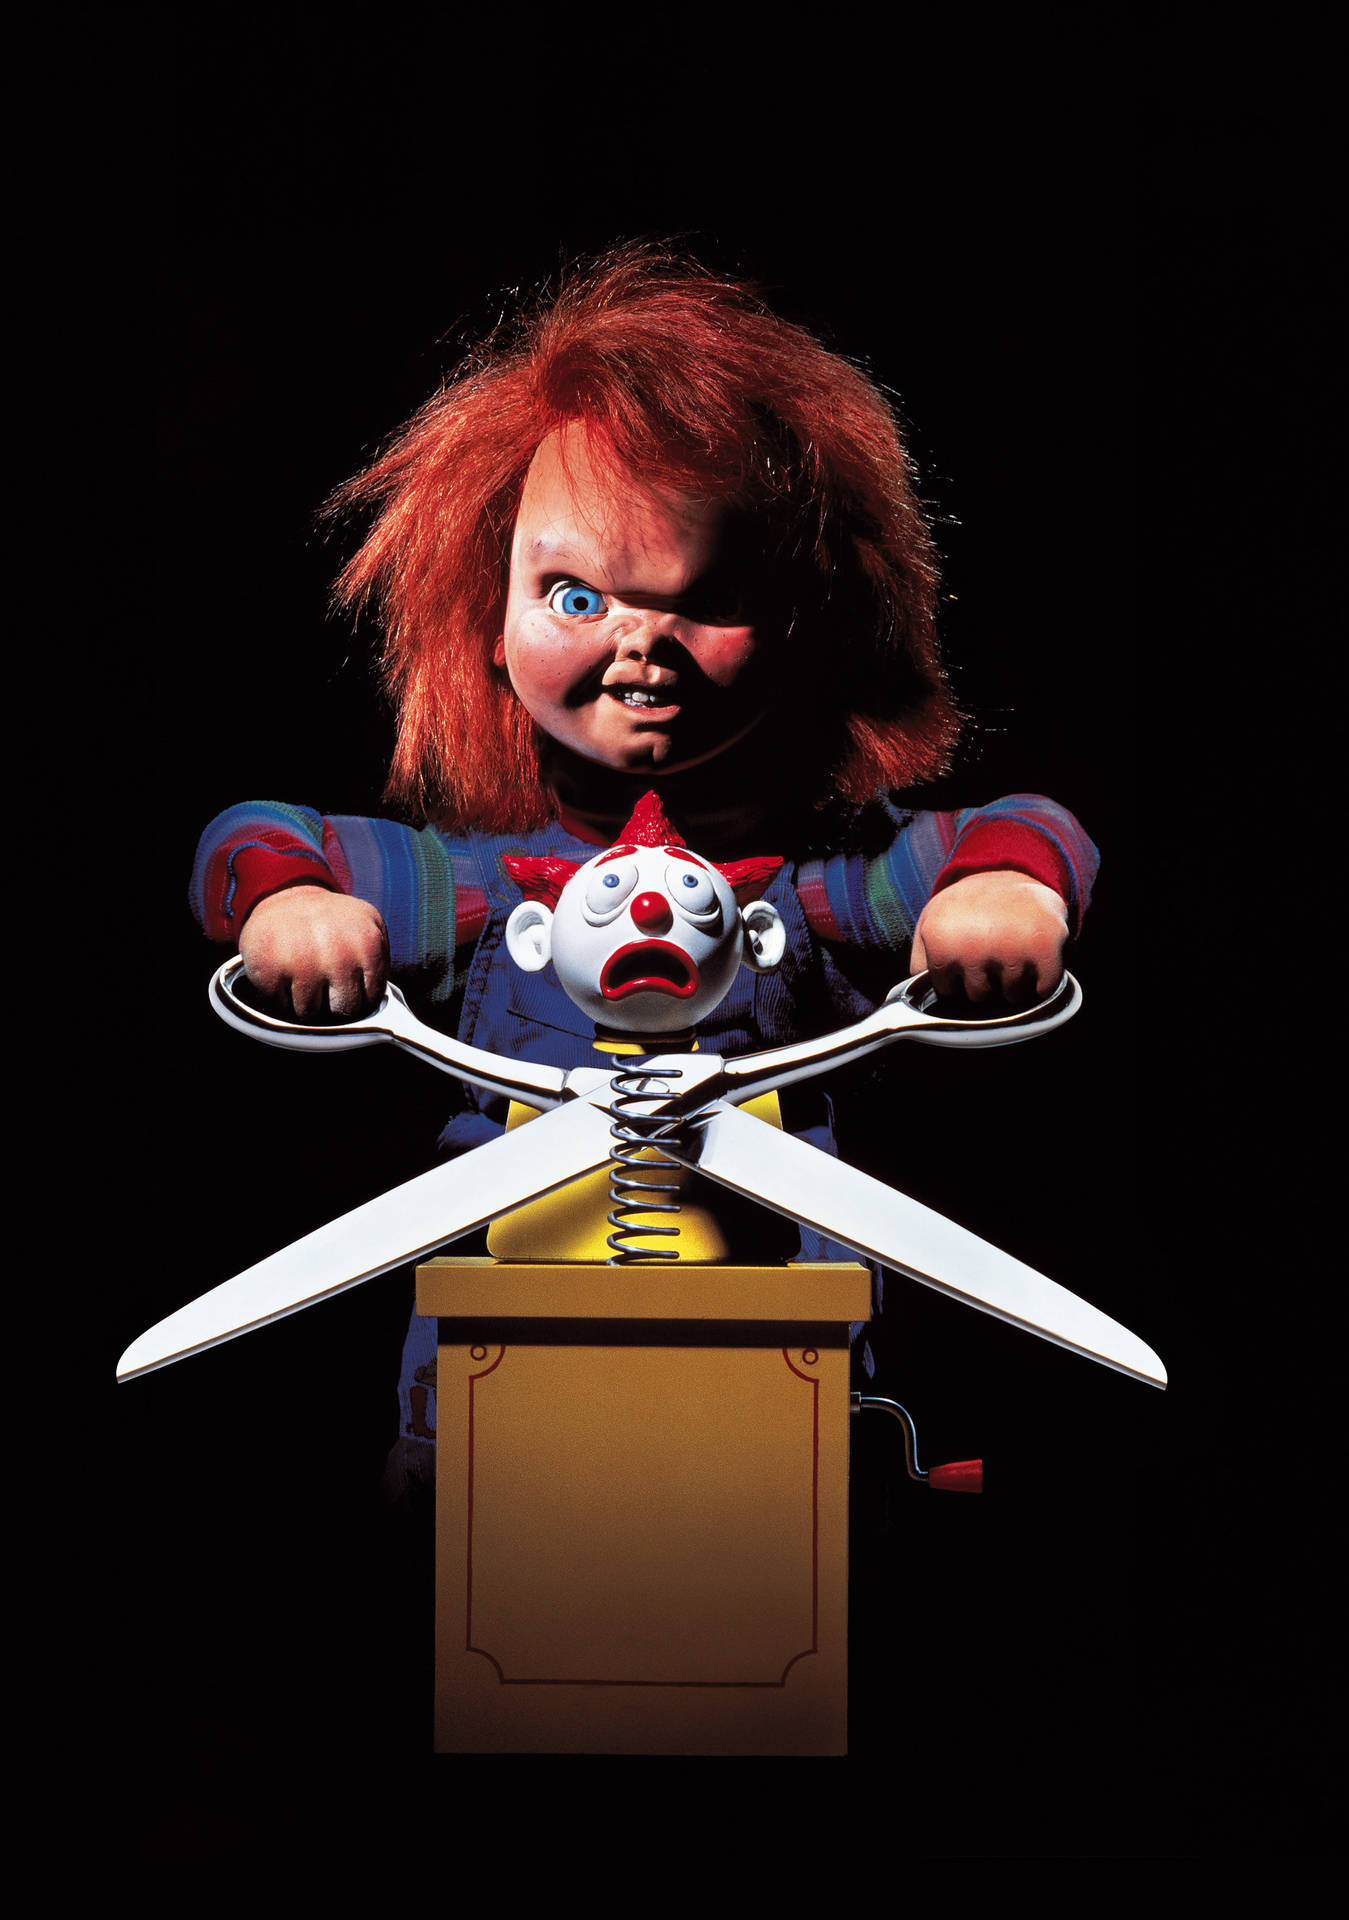 Chucky Child's Play 2 Movie Poster Background